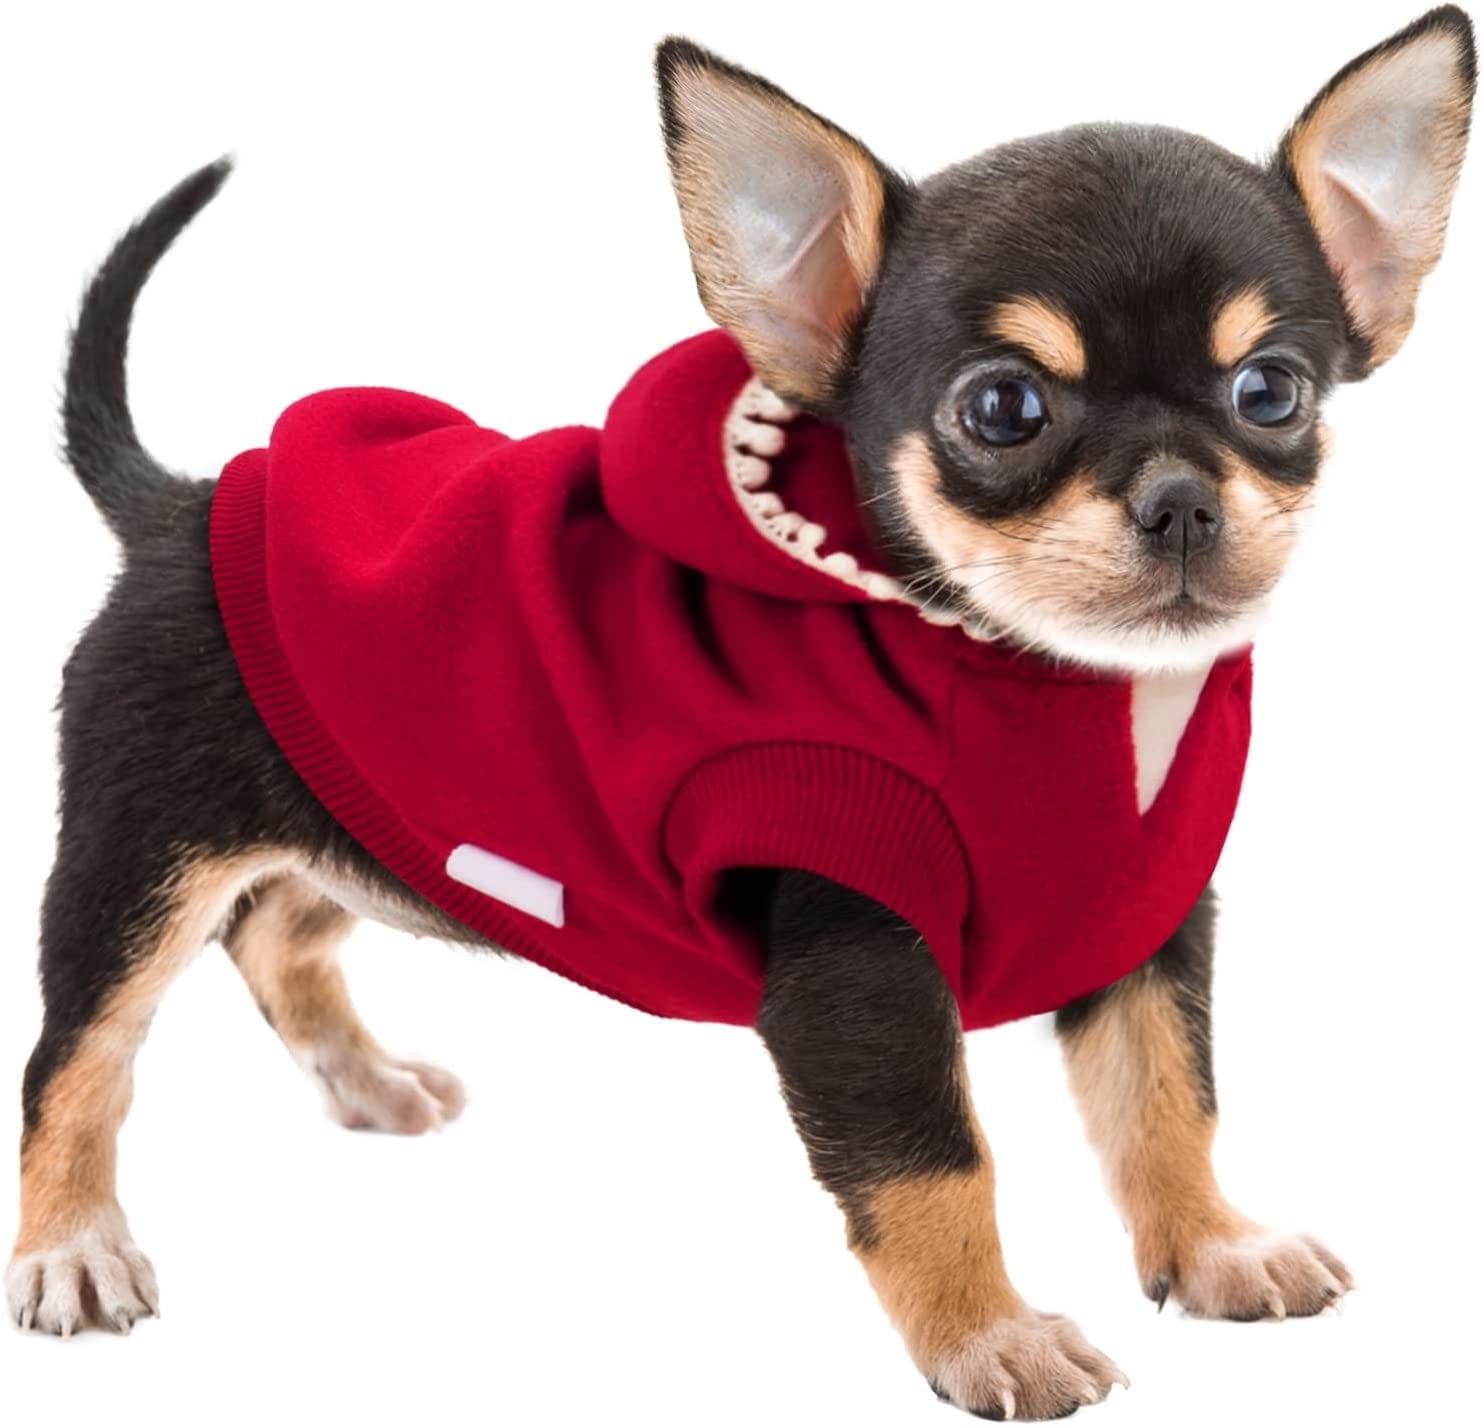 𝐍𝐄𝐖 𝐀𝐑𝐑𝐈𝐕𝐀𝐋 Frienperro Dog Clothes for Small Dogs Girl Boy, 100% Cotton Buffalo Plaid Small Dog Hoodie, Chihuahua Clothes Pet Cat Winter Warm Sweatshirt Sweater, Teacup Yorkie Puppy Coat Animals & Pet Supplies > Pet Supplies > Dog Supplies > Dog Apparel Frienperro Red New XXX-Small 